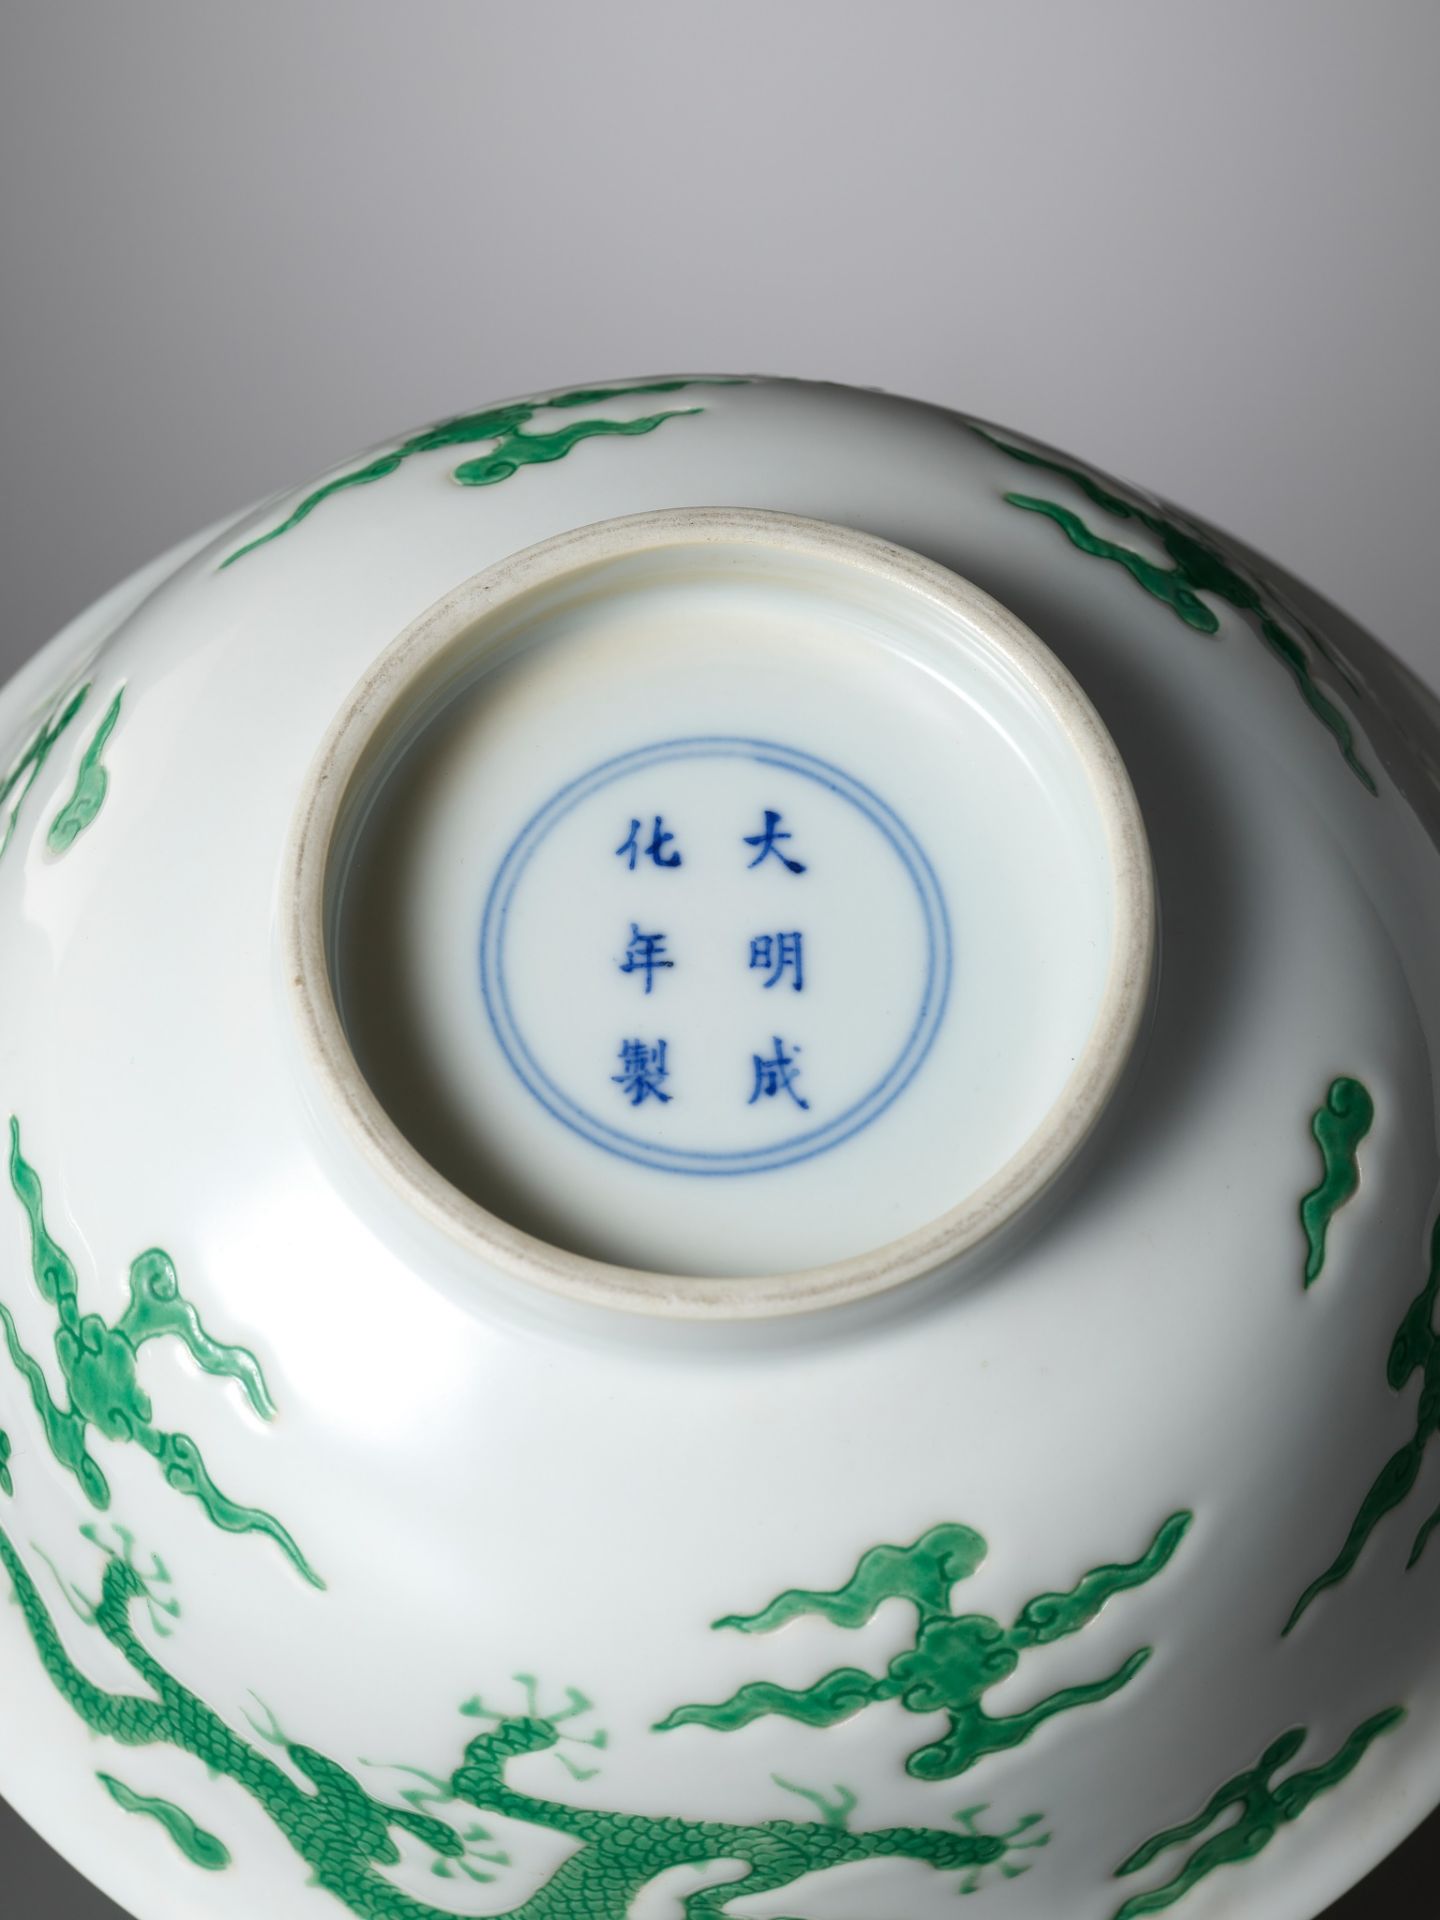 A RARE PAIR OF MING-STYLE GREEN-ENAMELED 'DRAGON' BOWLS, KANGXI PERIOD - Image 15 of 18